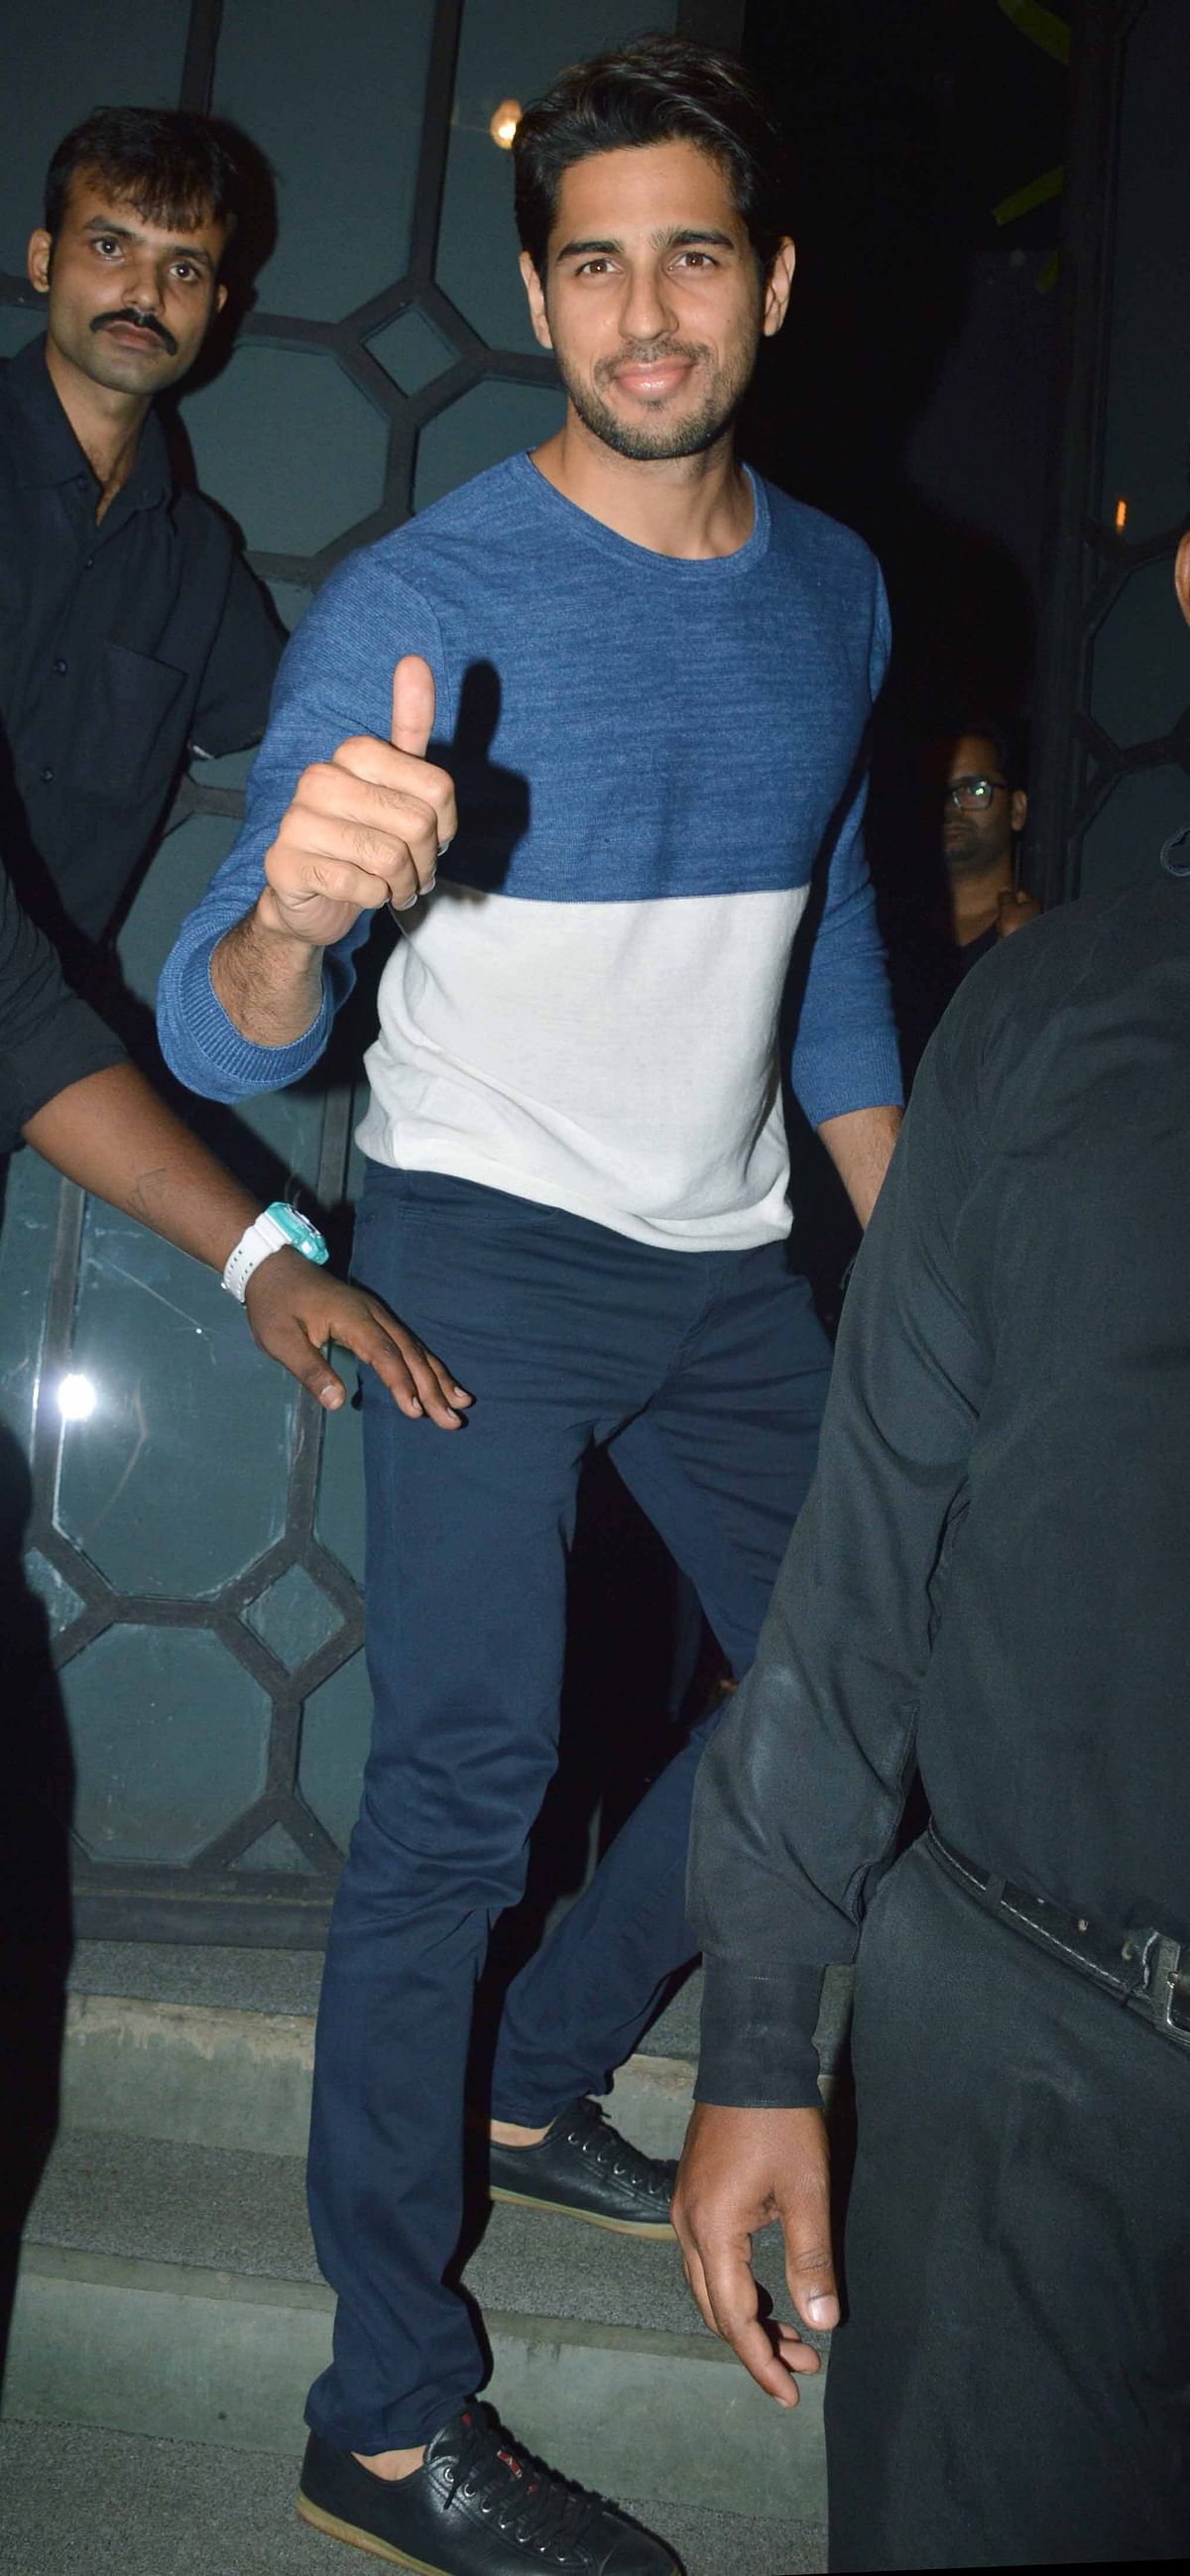 Saturday night was Bollywood night as all the stars got under one roof to party.